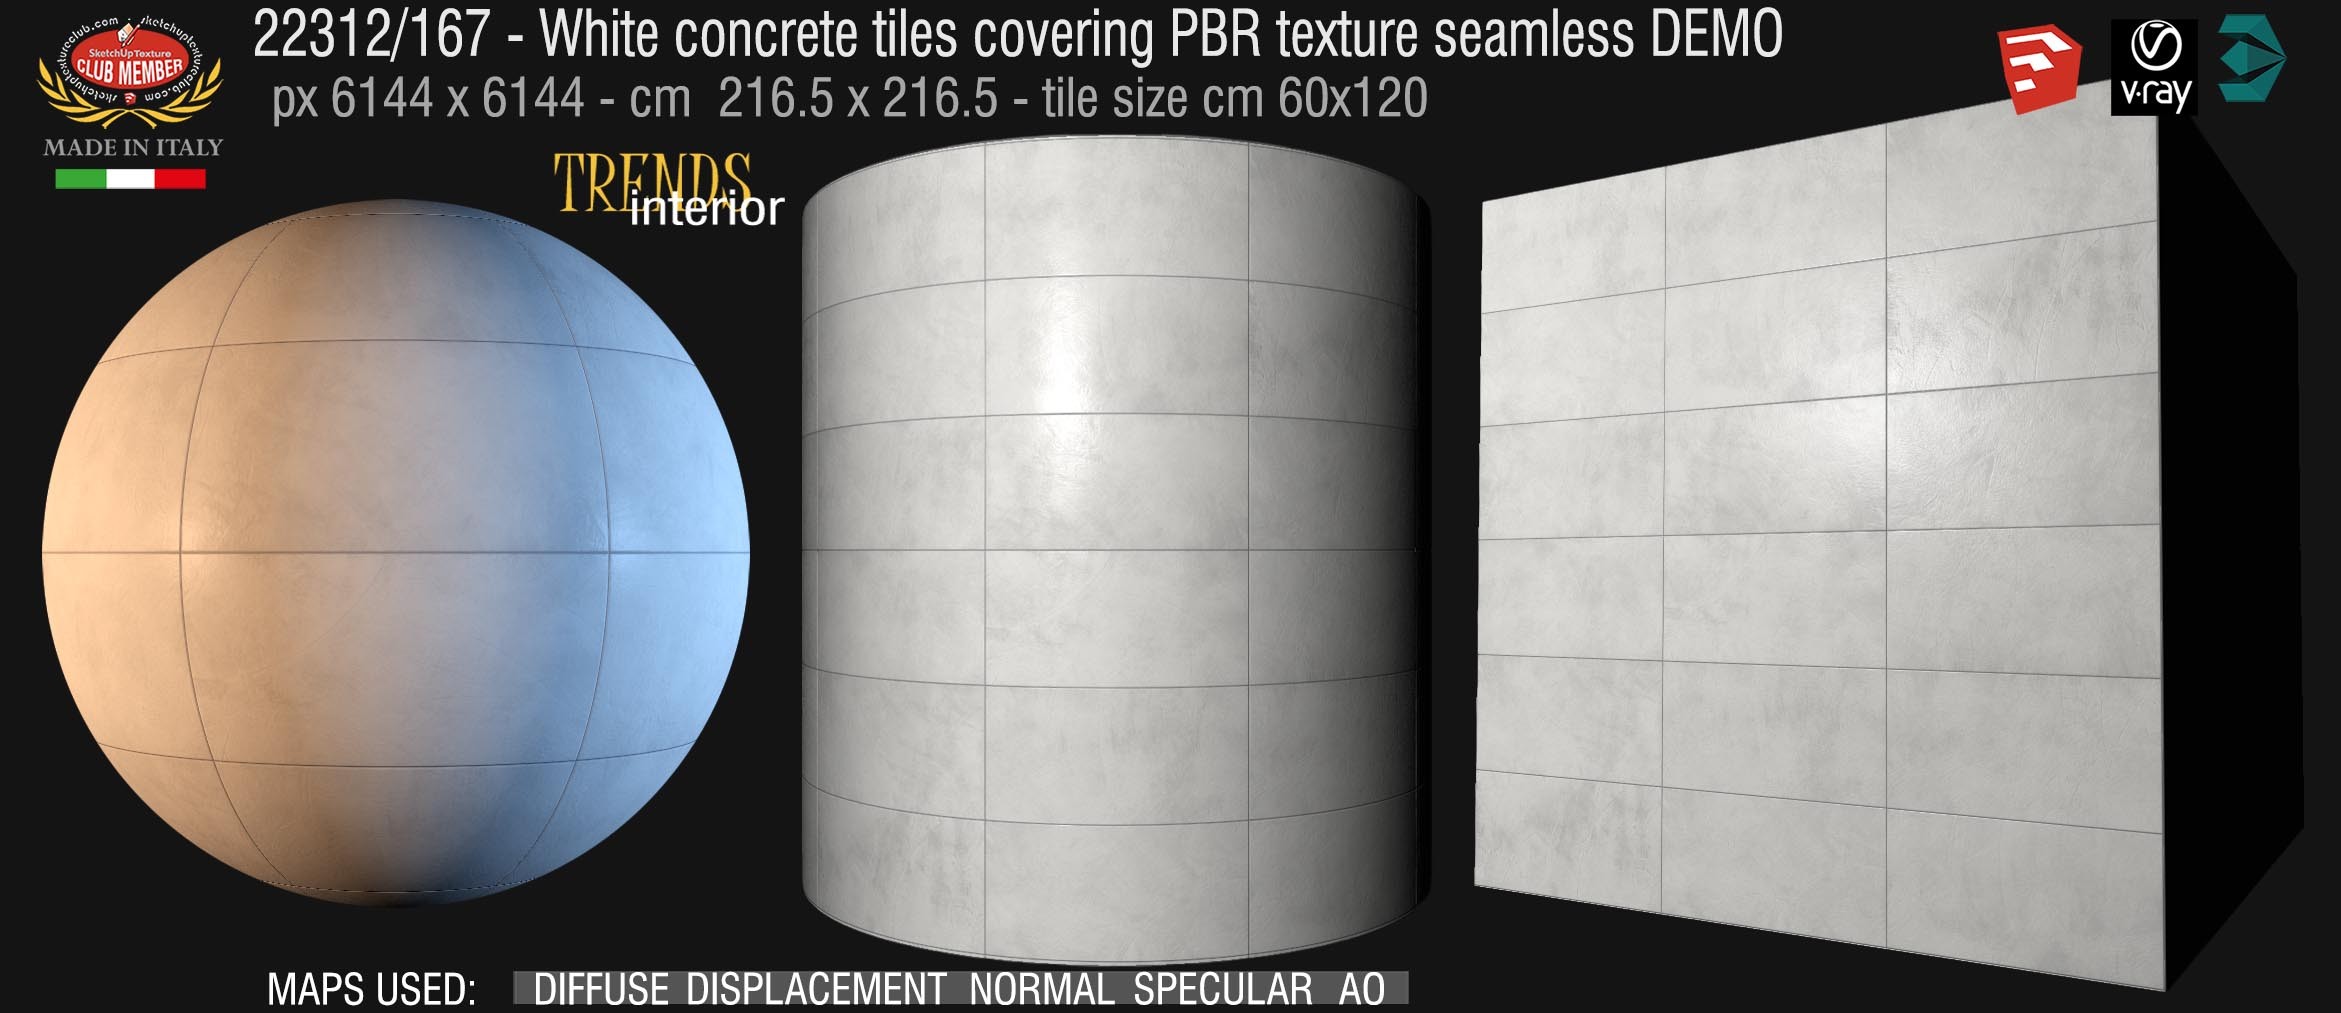 22312_167 White concrete tiles covering PBR texture seamless DEMO